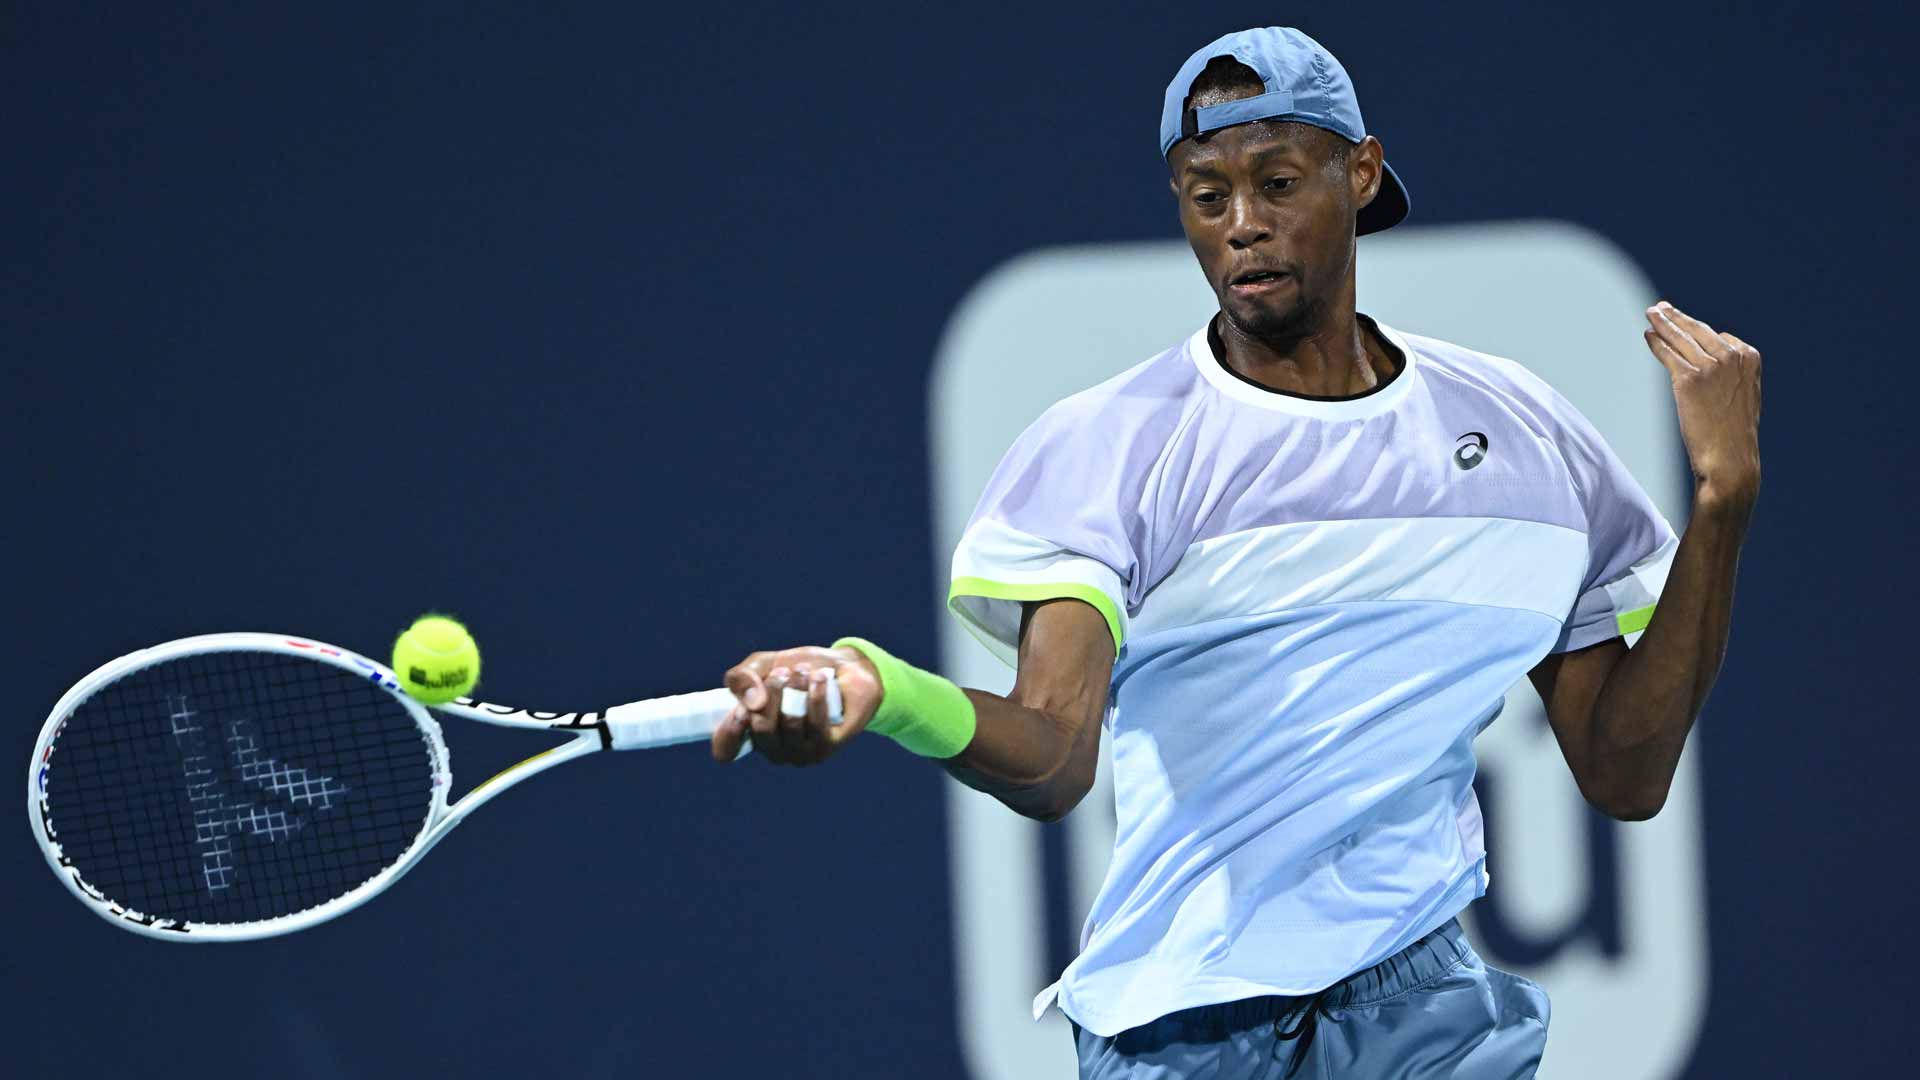 Christopher Eubanks defeats Adrian Mannarino in two tie-breaks to reach the quarter-finals in Miami.